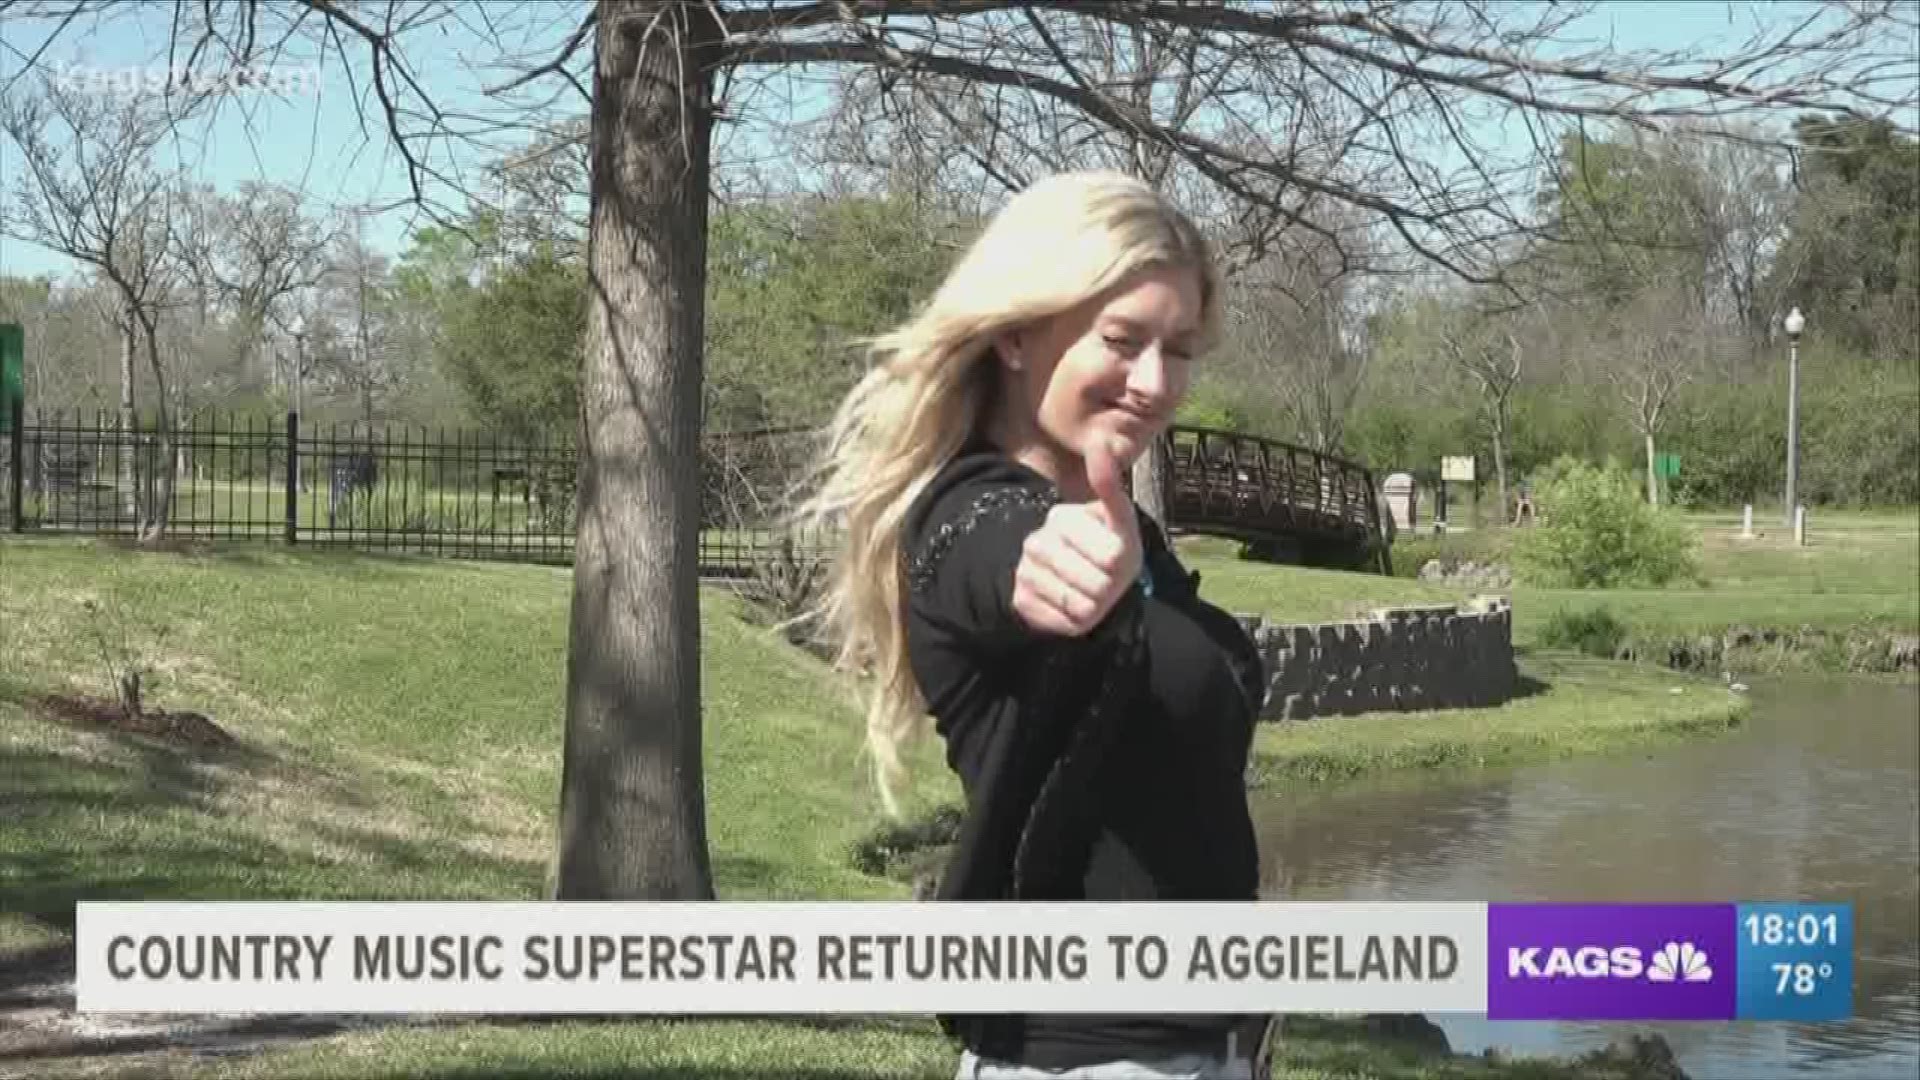 The Spirit of Texas festival starts tonight and headlining the festival is country music superstar Stephanie Quayle.